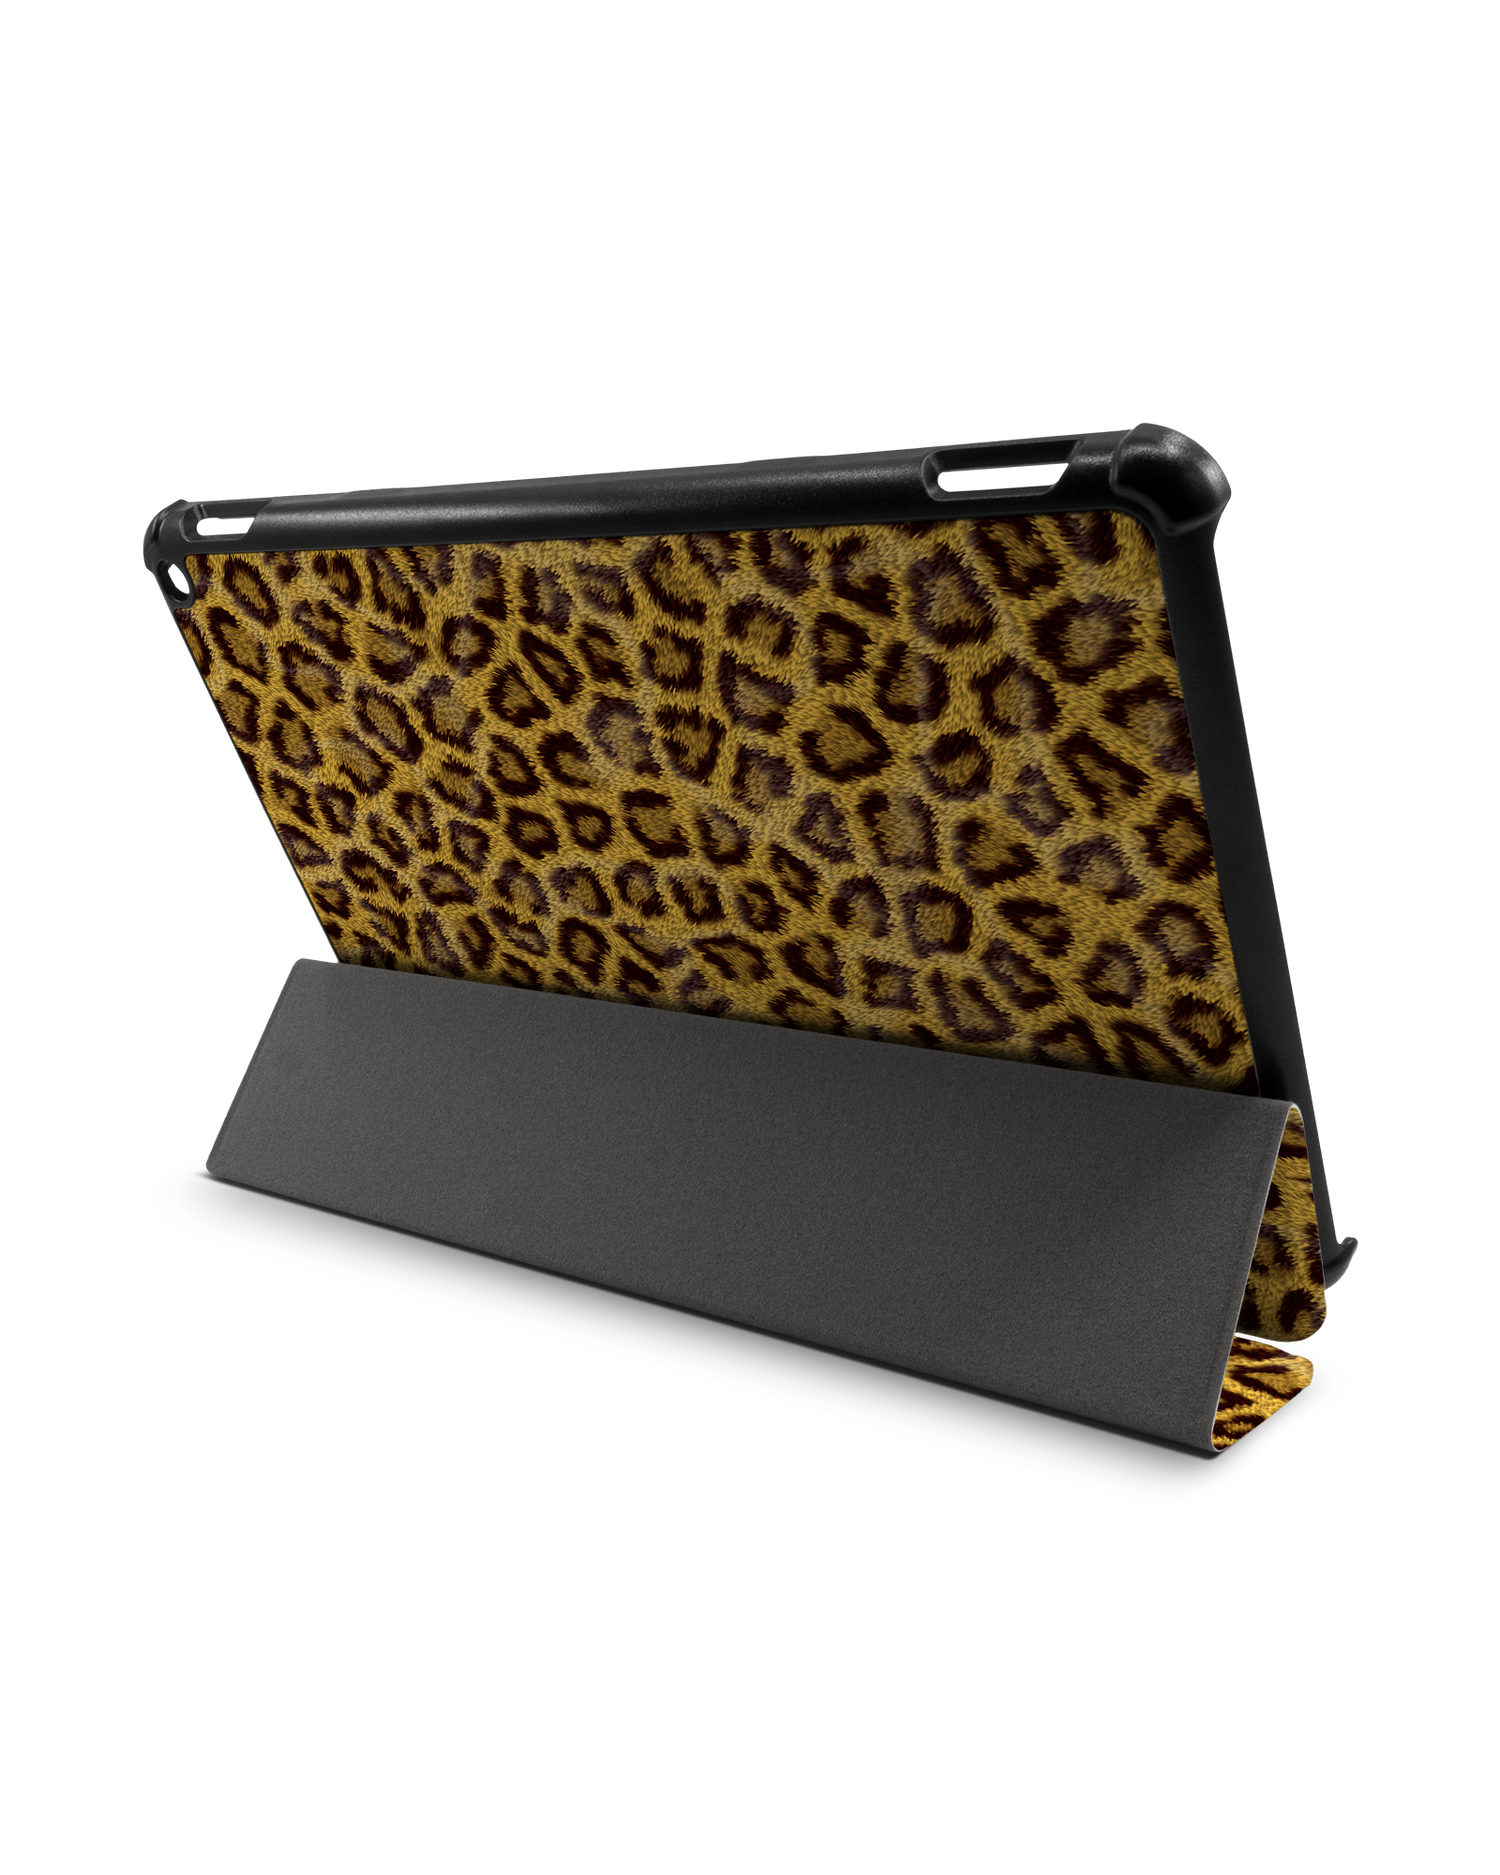 Leopard Skin Tablet Smart Case for Amazon Fire HD 10 (2021): Used as Stand